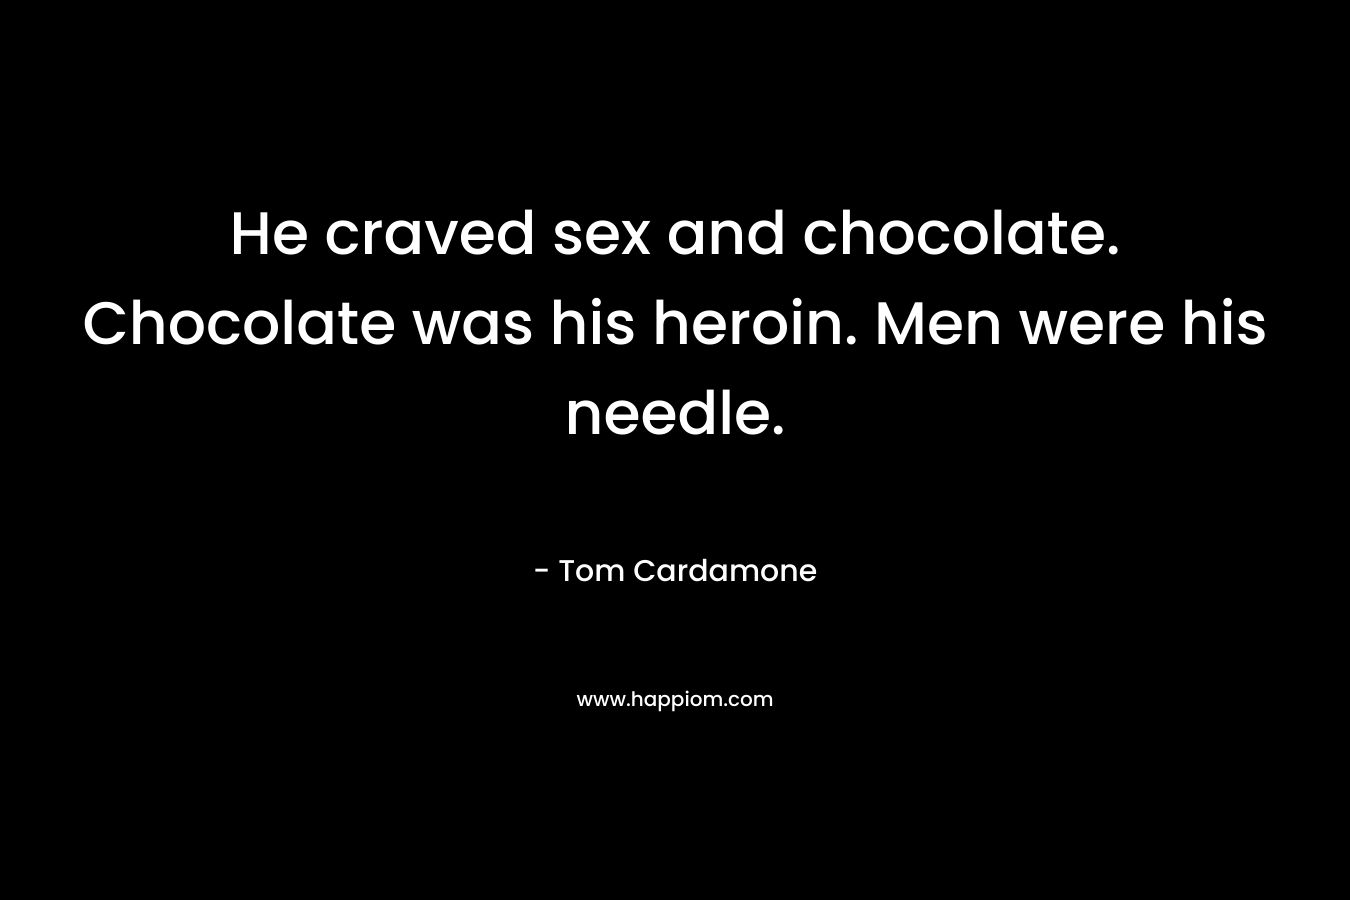 He craved sex and chocolate. Chocolate was his heroin. Men were his needle.